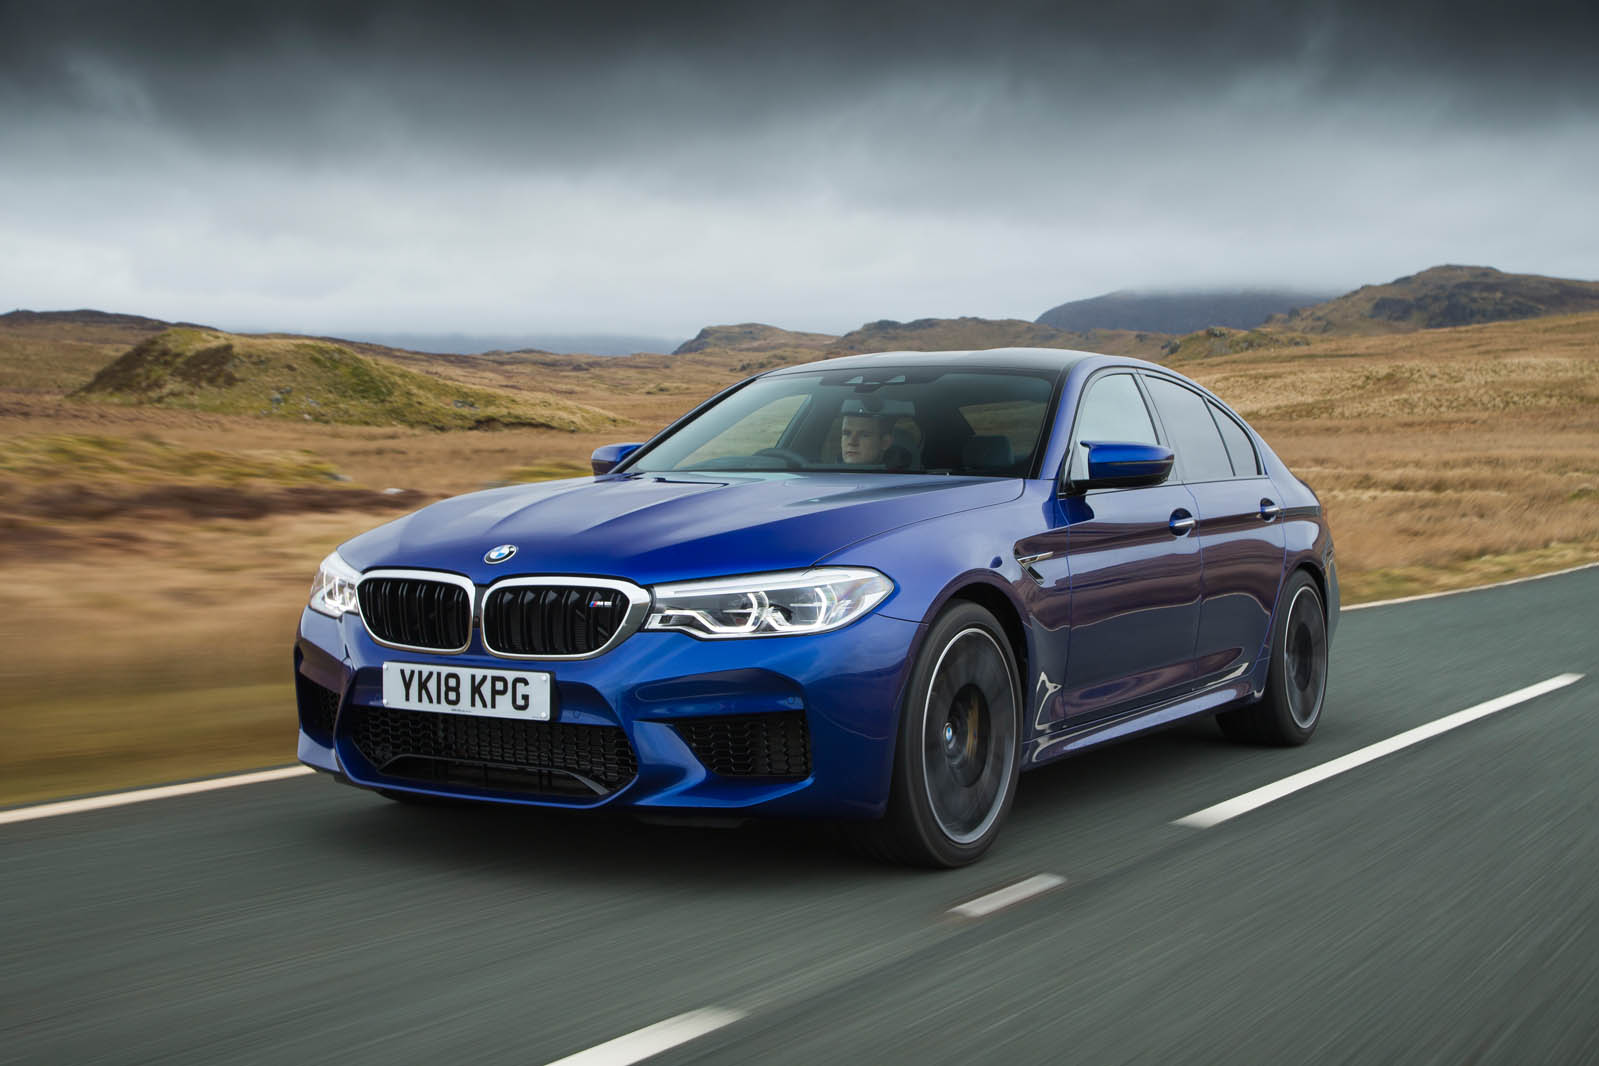 BMW M5 2018 review hero front